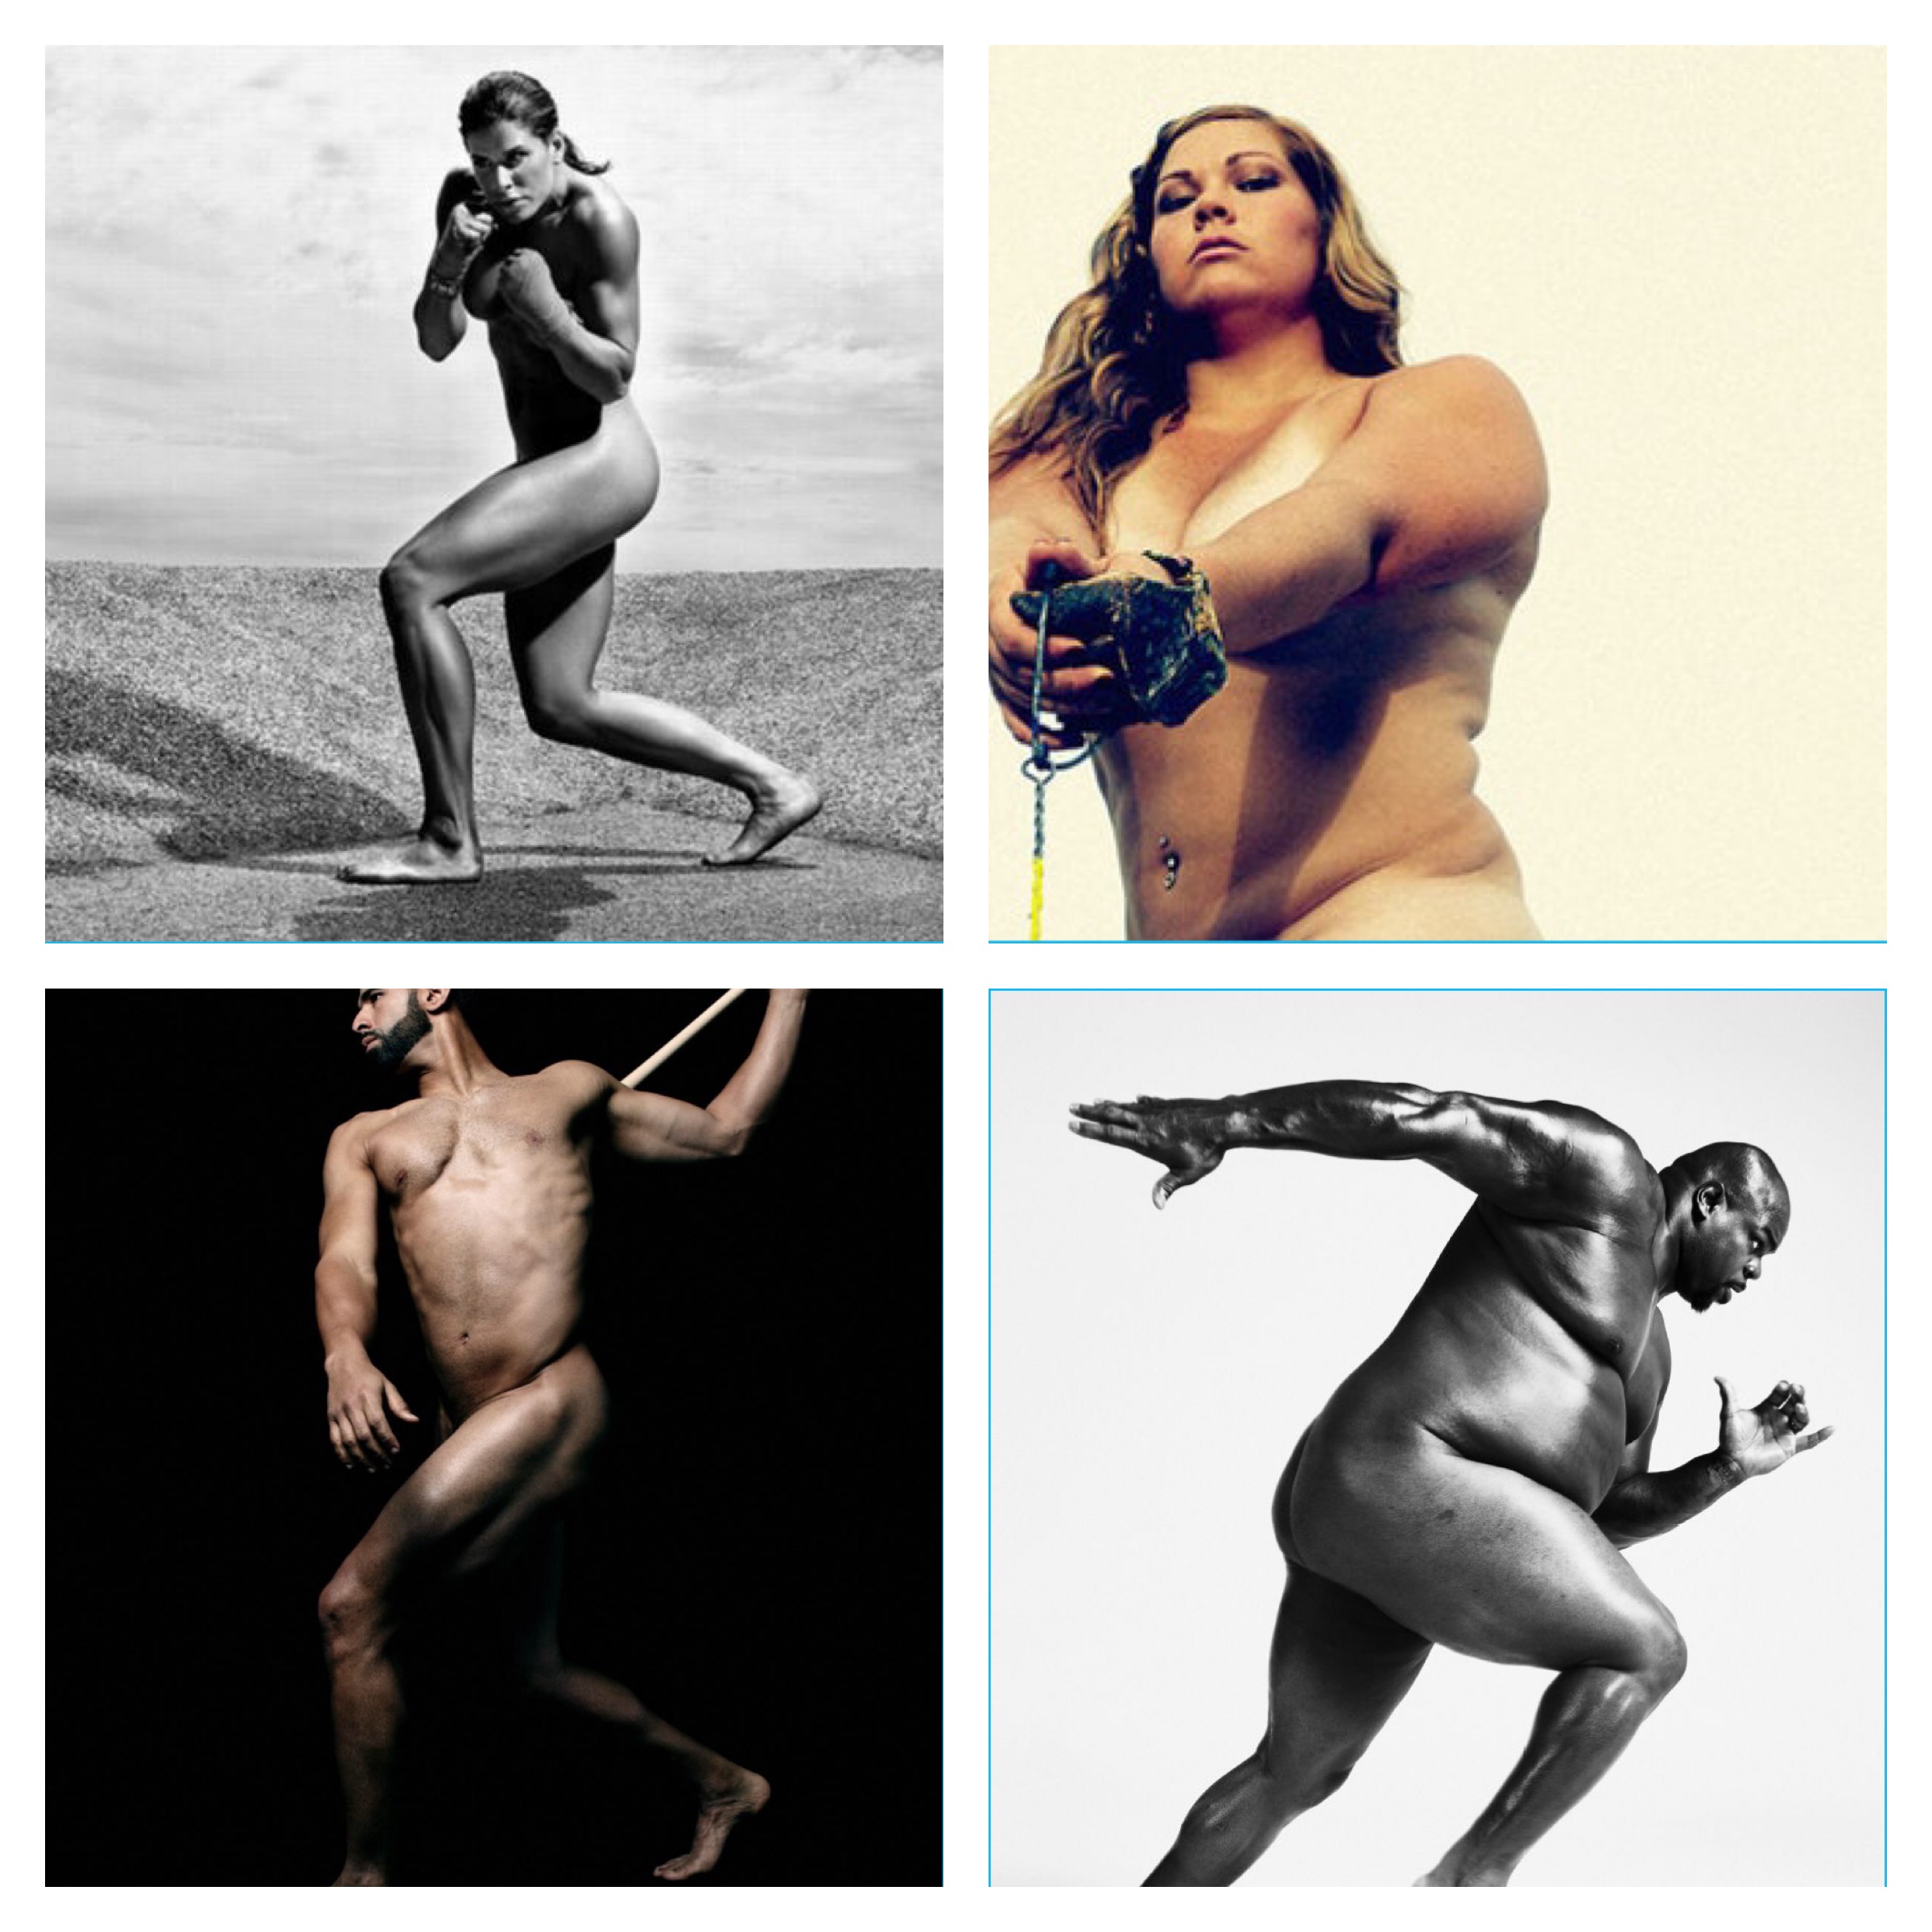 ESPN Nude athlete shoots from top right (pro boxer danyelle wolf, olympic s...